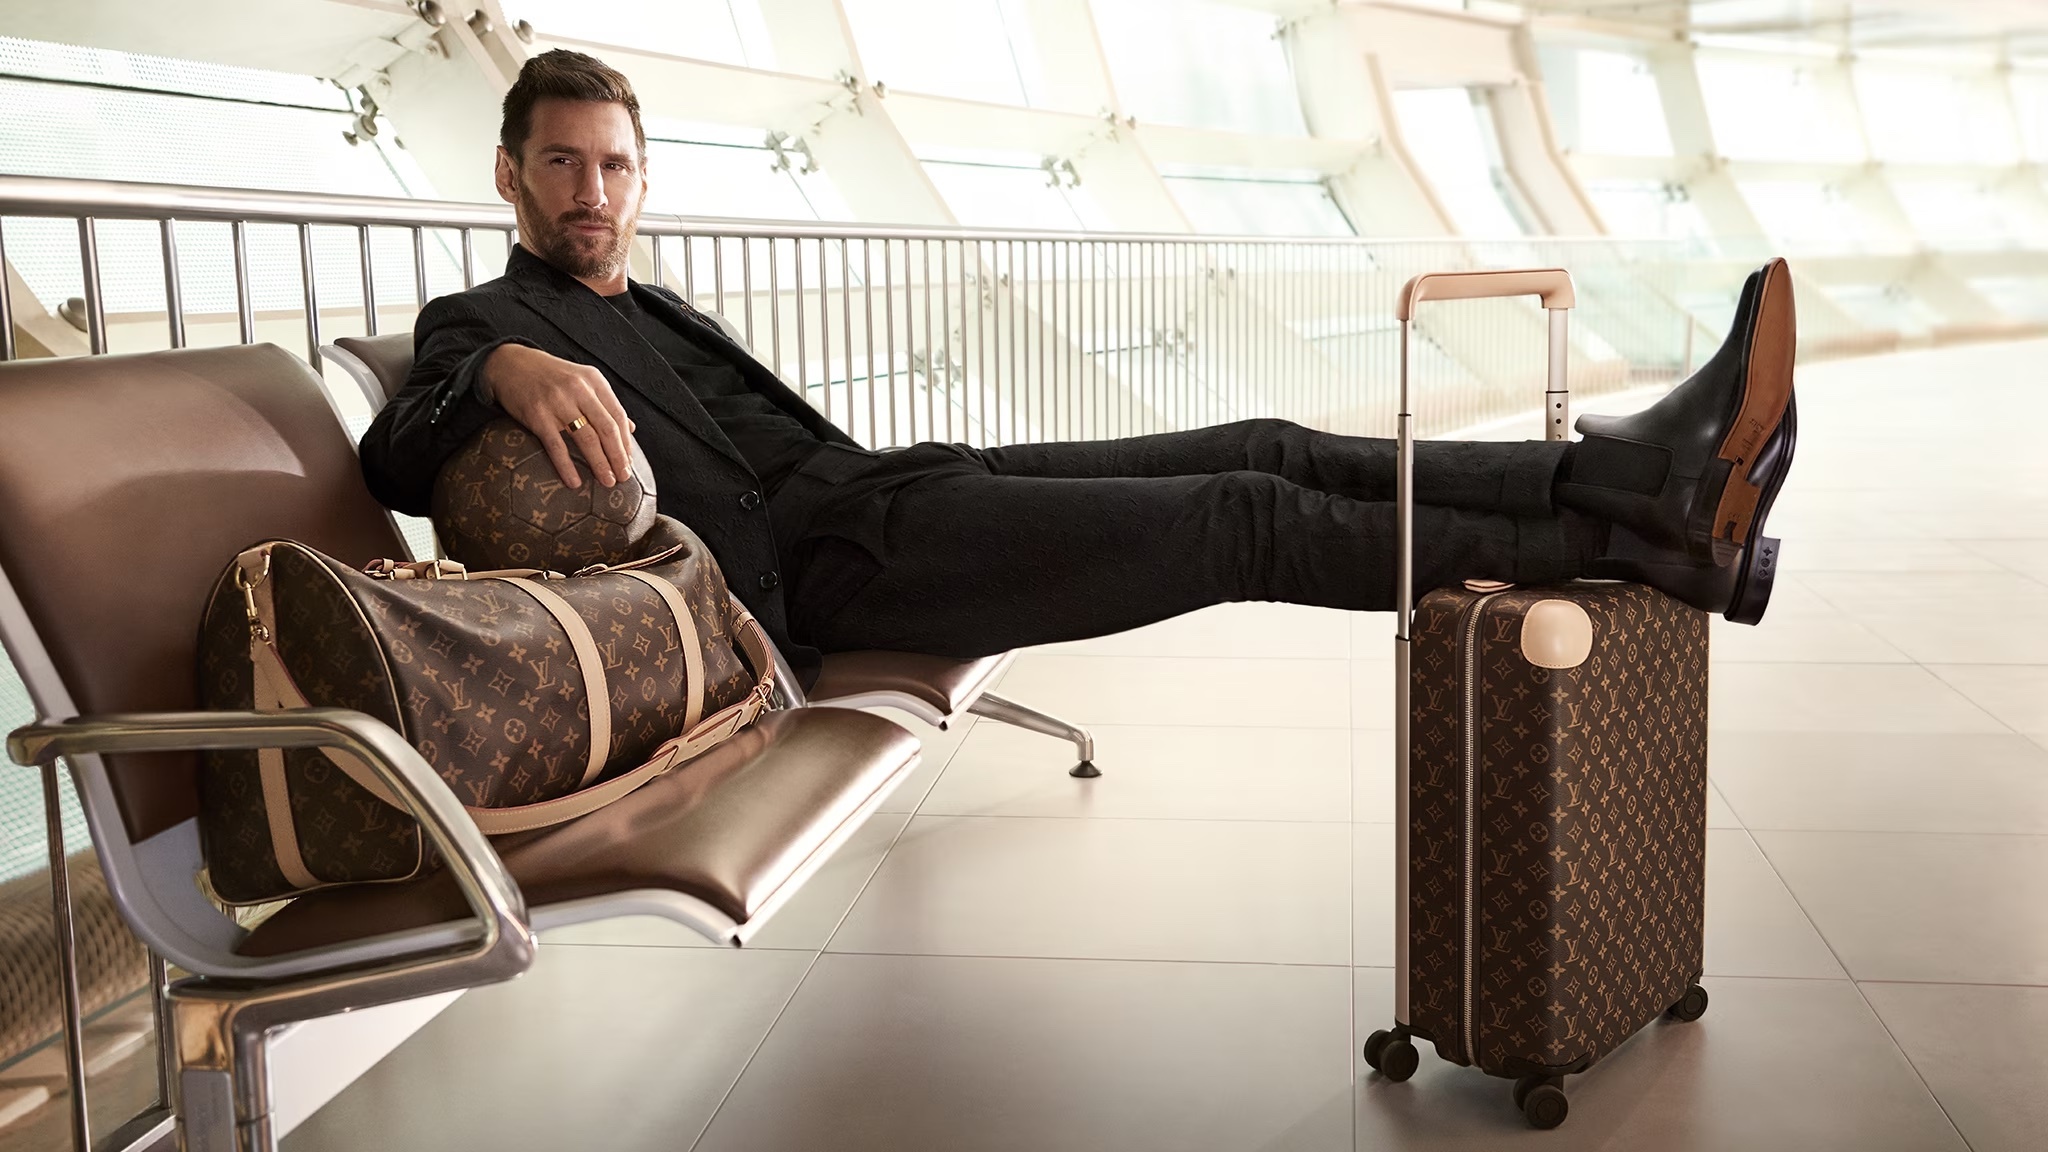 Overtaking musicians and actors, Western sporting legends have evolved from the playing field to luxury’s new it boys across China. But Messi’s recent misstep is a lesson in navigating the mainland. Photo: Louis Vuitton